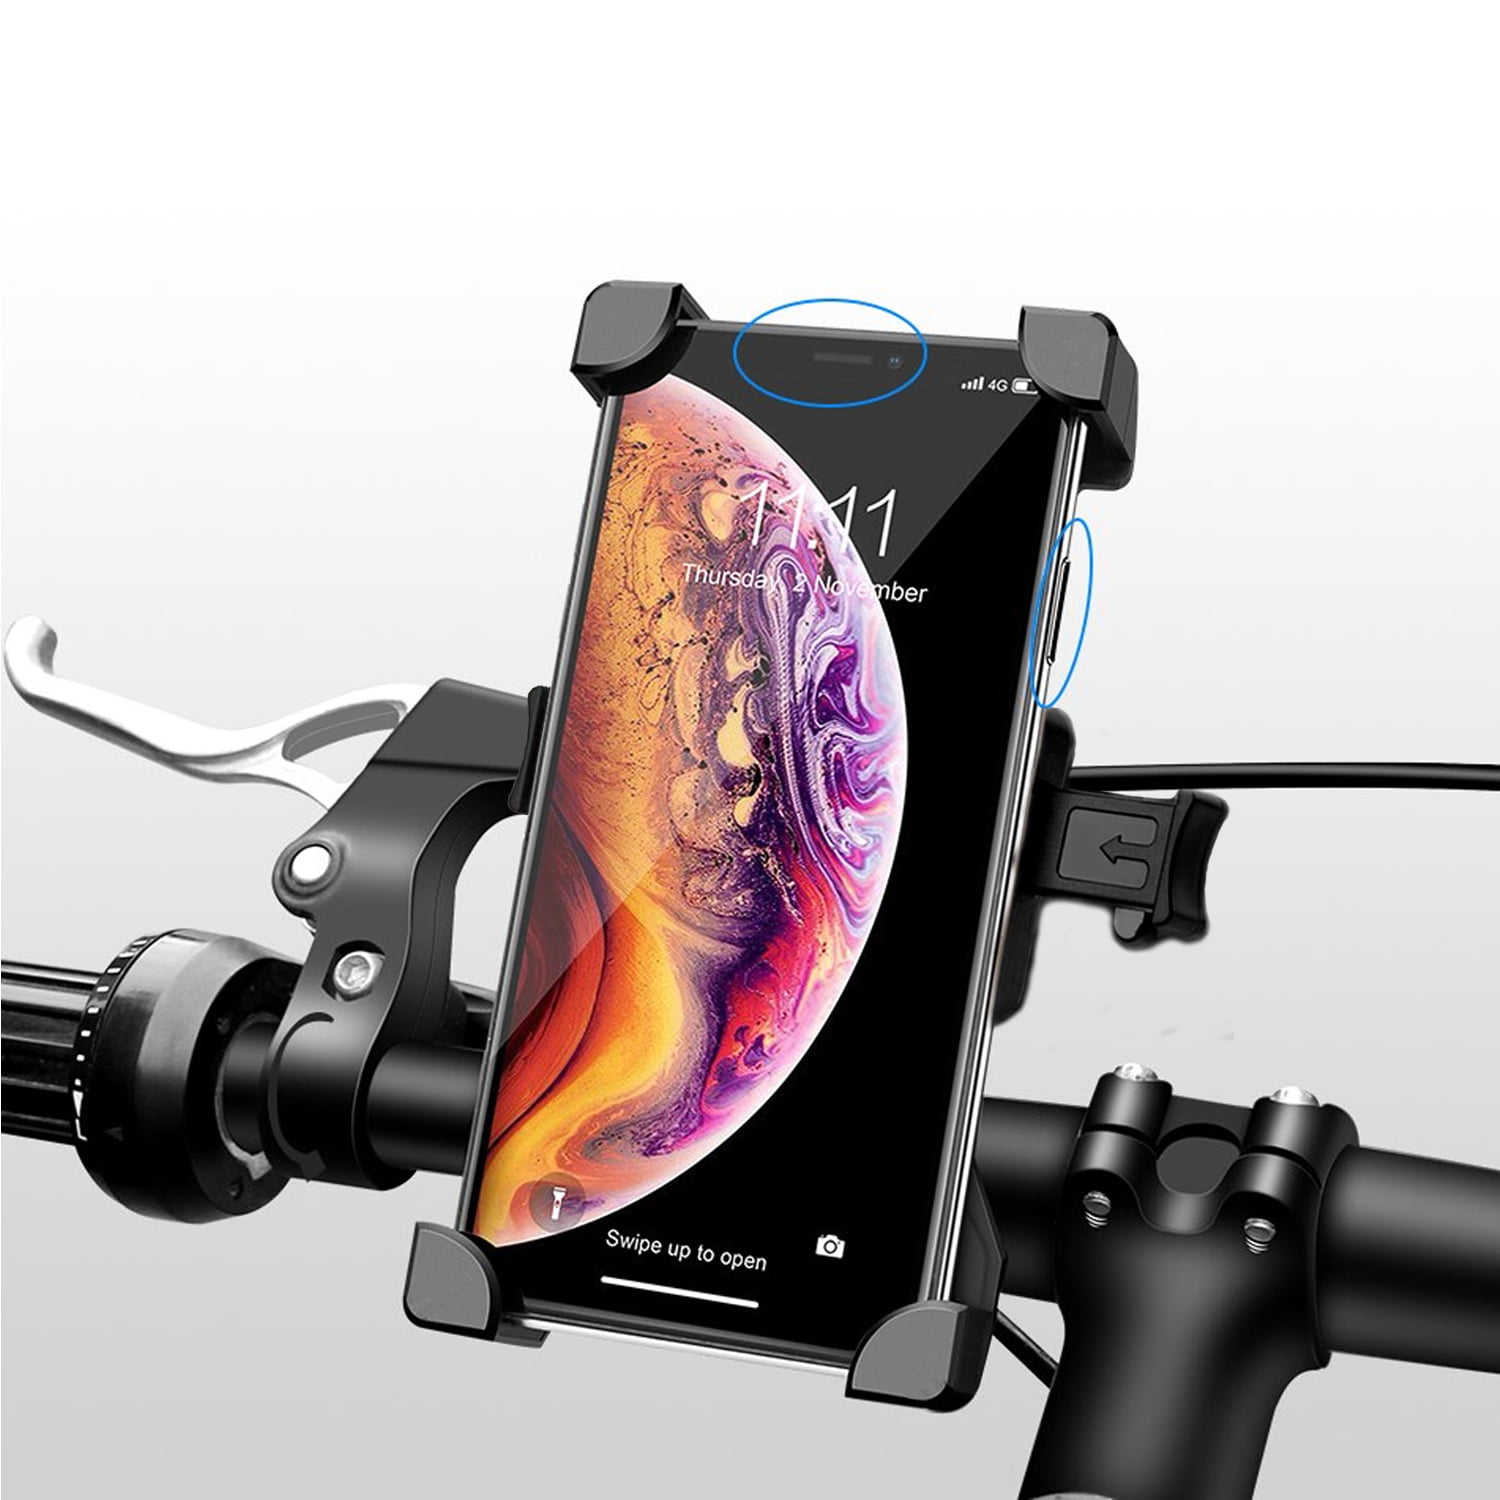 Suit for All 4.0-6.8 Phone Devices Phone Holder for Bike Motorcycles Stroller Shopping Cart Electric Scooter Indoor Treadmill Spin Bike Bike Phone Mount